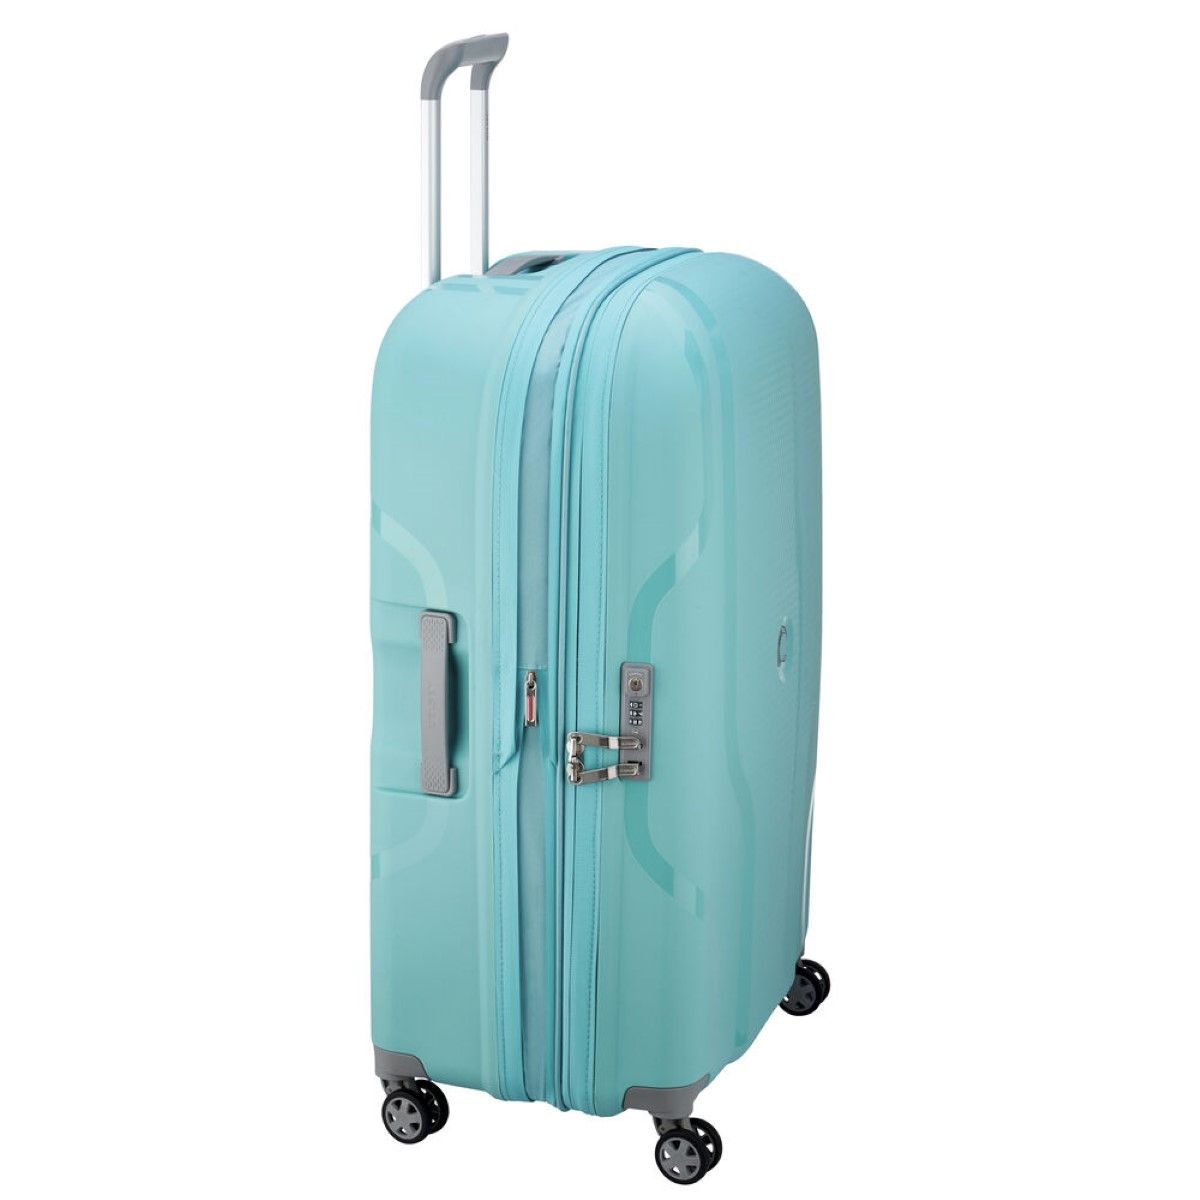 Expandable Large Trolley Clavel 76 cm Delsey, hardcase four wheeled trolley with a vintage design, with zipped compartment, TSA combination lock, side handle, and telescopic double tube handle.